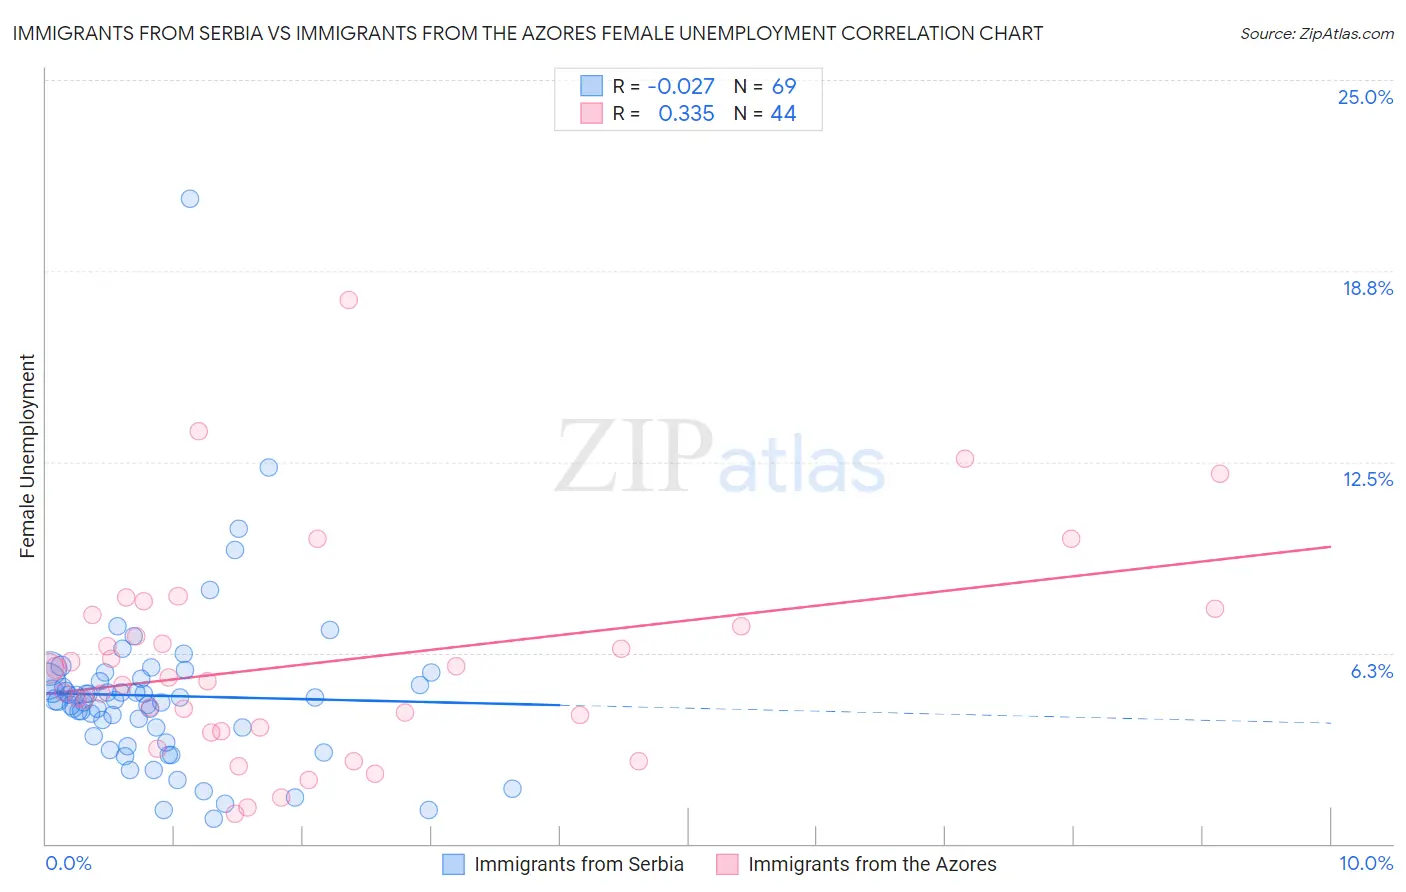 Immigrants from Serbia vs Immigrants from the Azores Female Unemployment